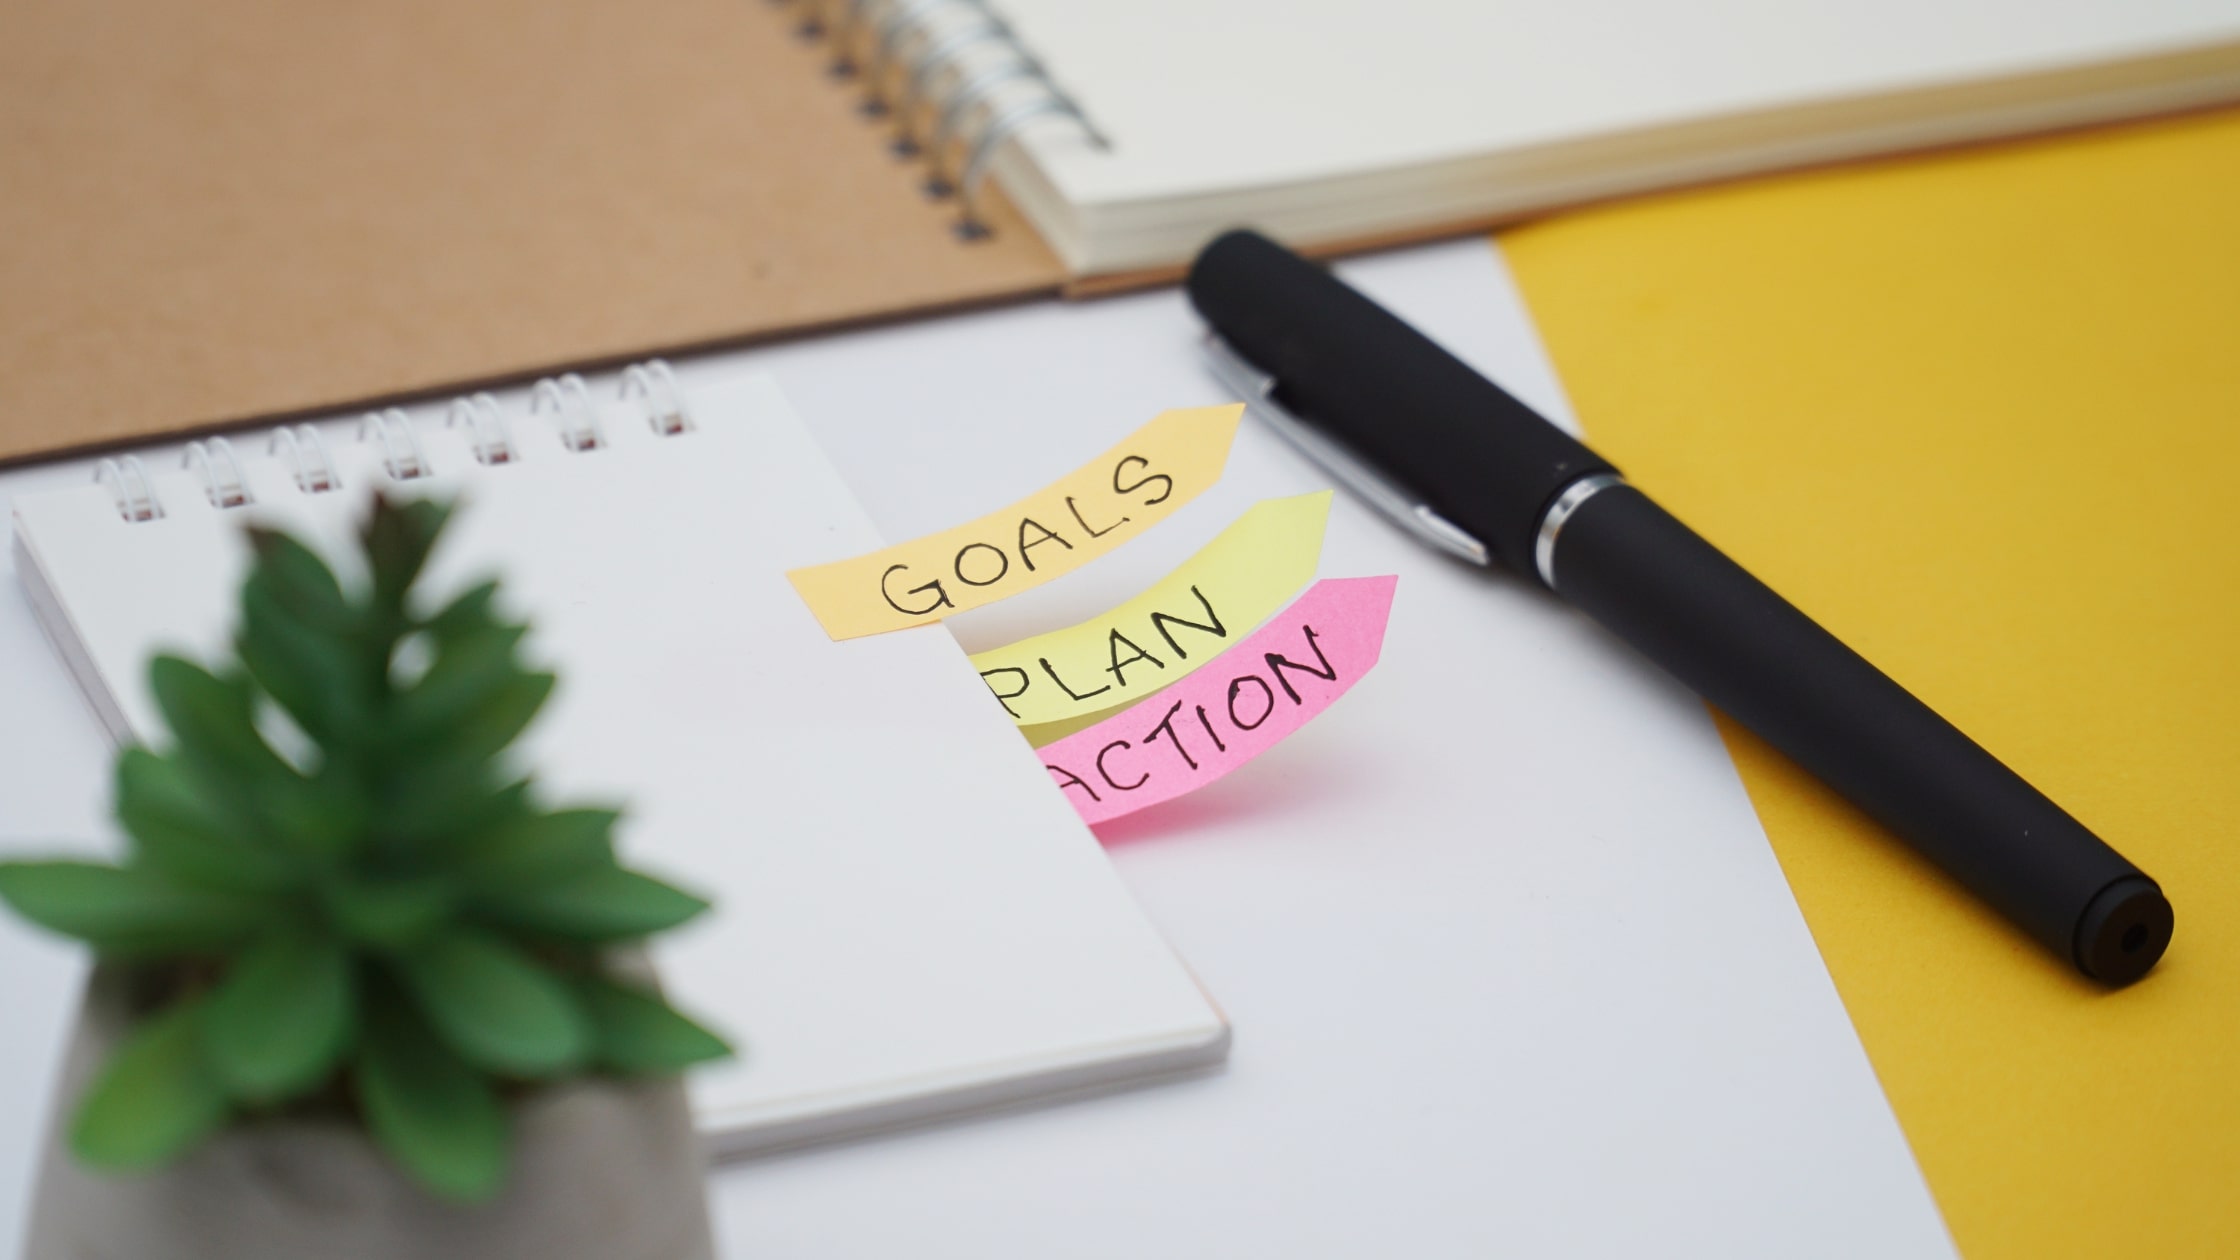 Content Auditing - Goals, Plan, Action Sticky Note